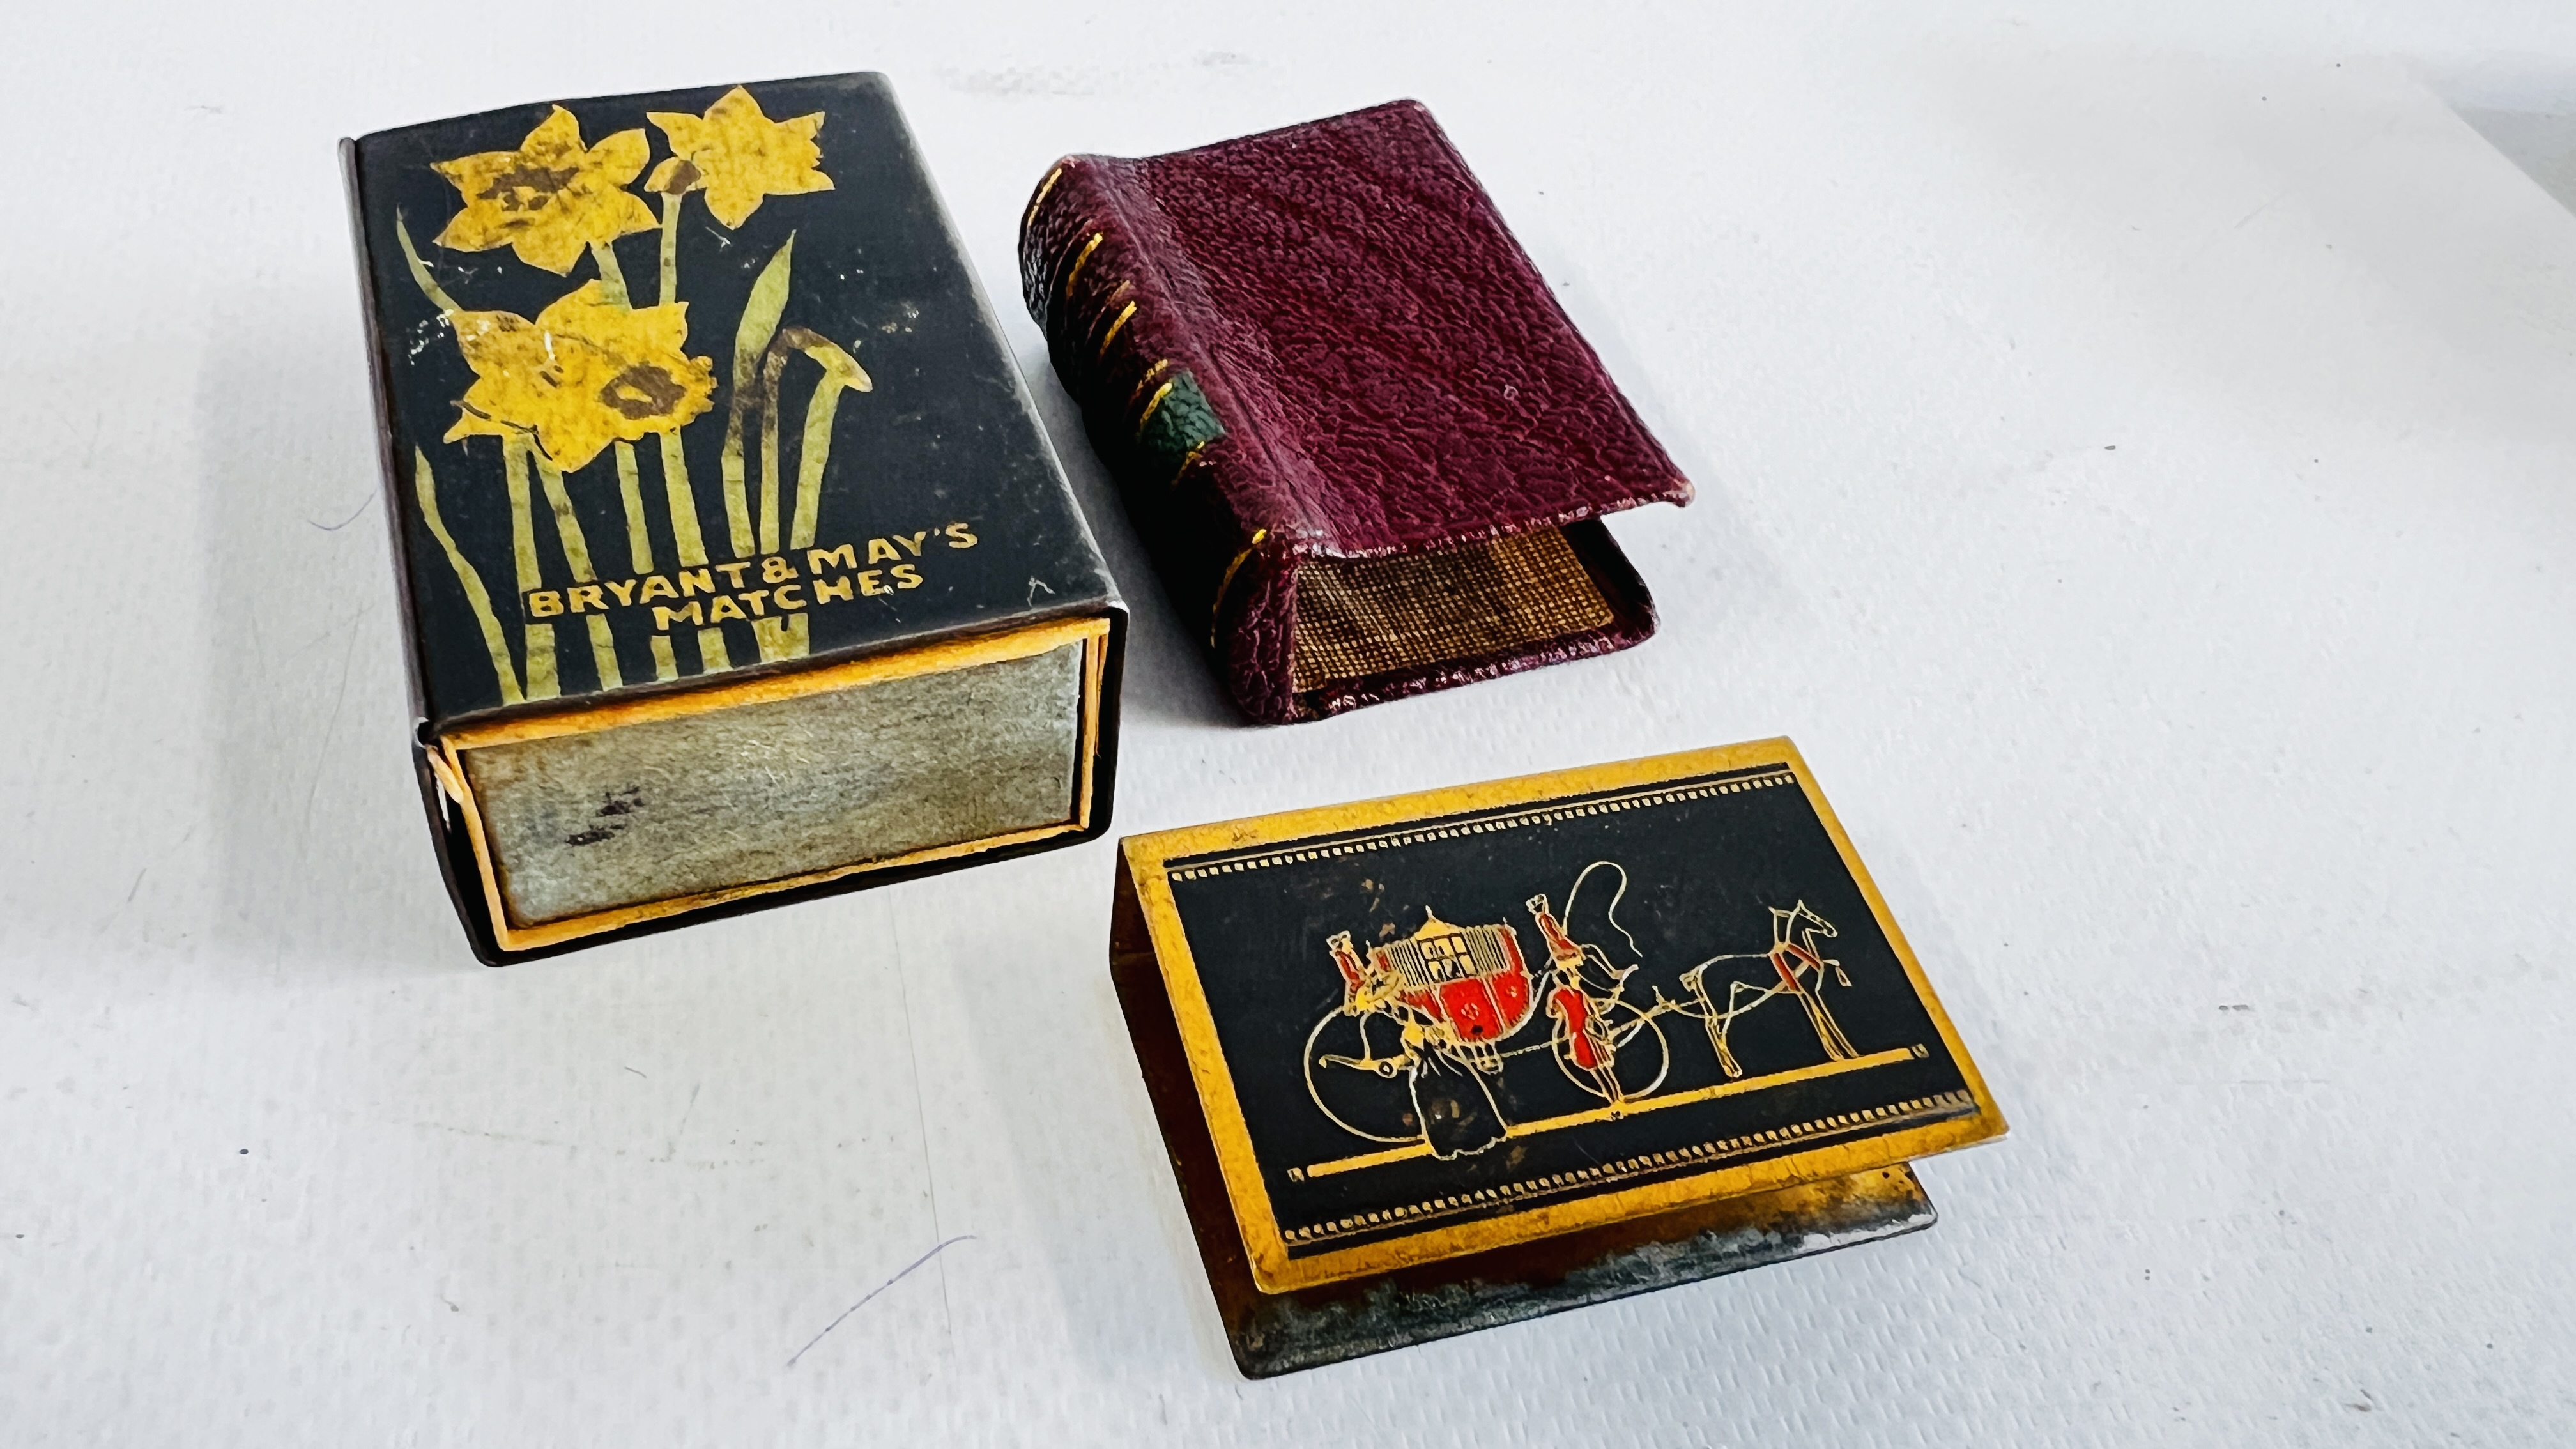 COLLECTION OF 10 ANTIQUE MATCH BOX HOLDERS AND VESTAS INCLUDING BRYANT AND MAY, BOOK DESIGN, - Image 3 of 4